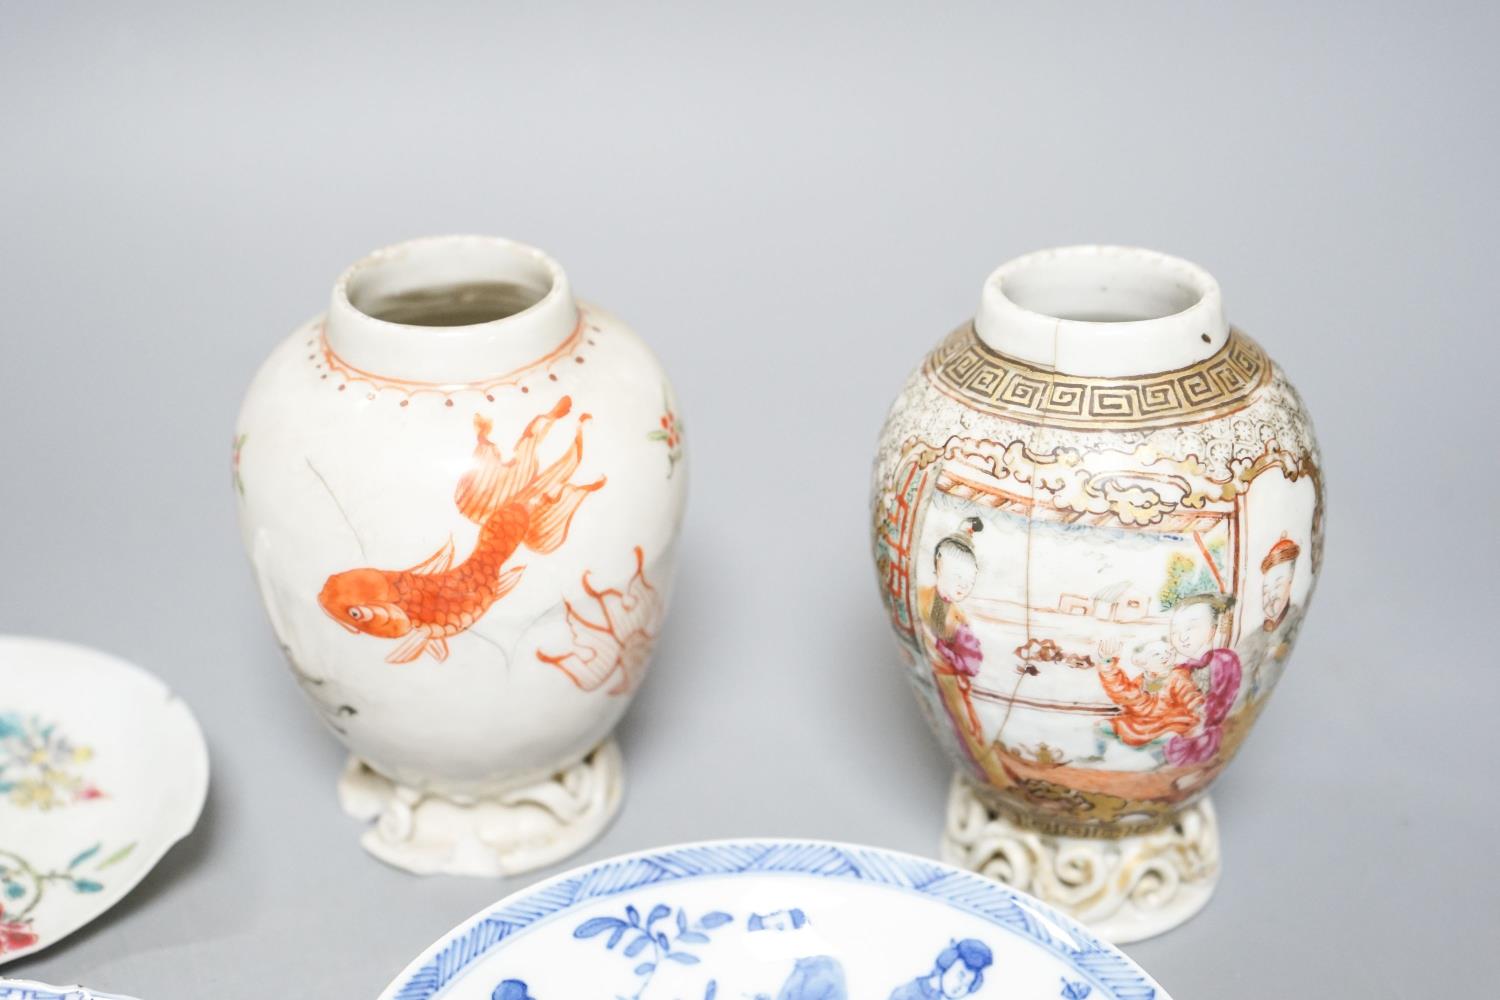 Assorted Chinese porcelain vases and tea wares, Qing dynasty or later - Image 4 of 7